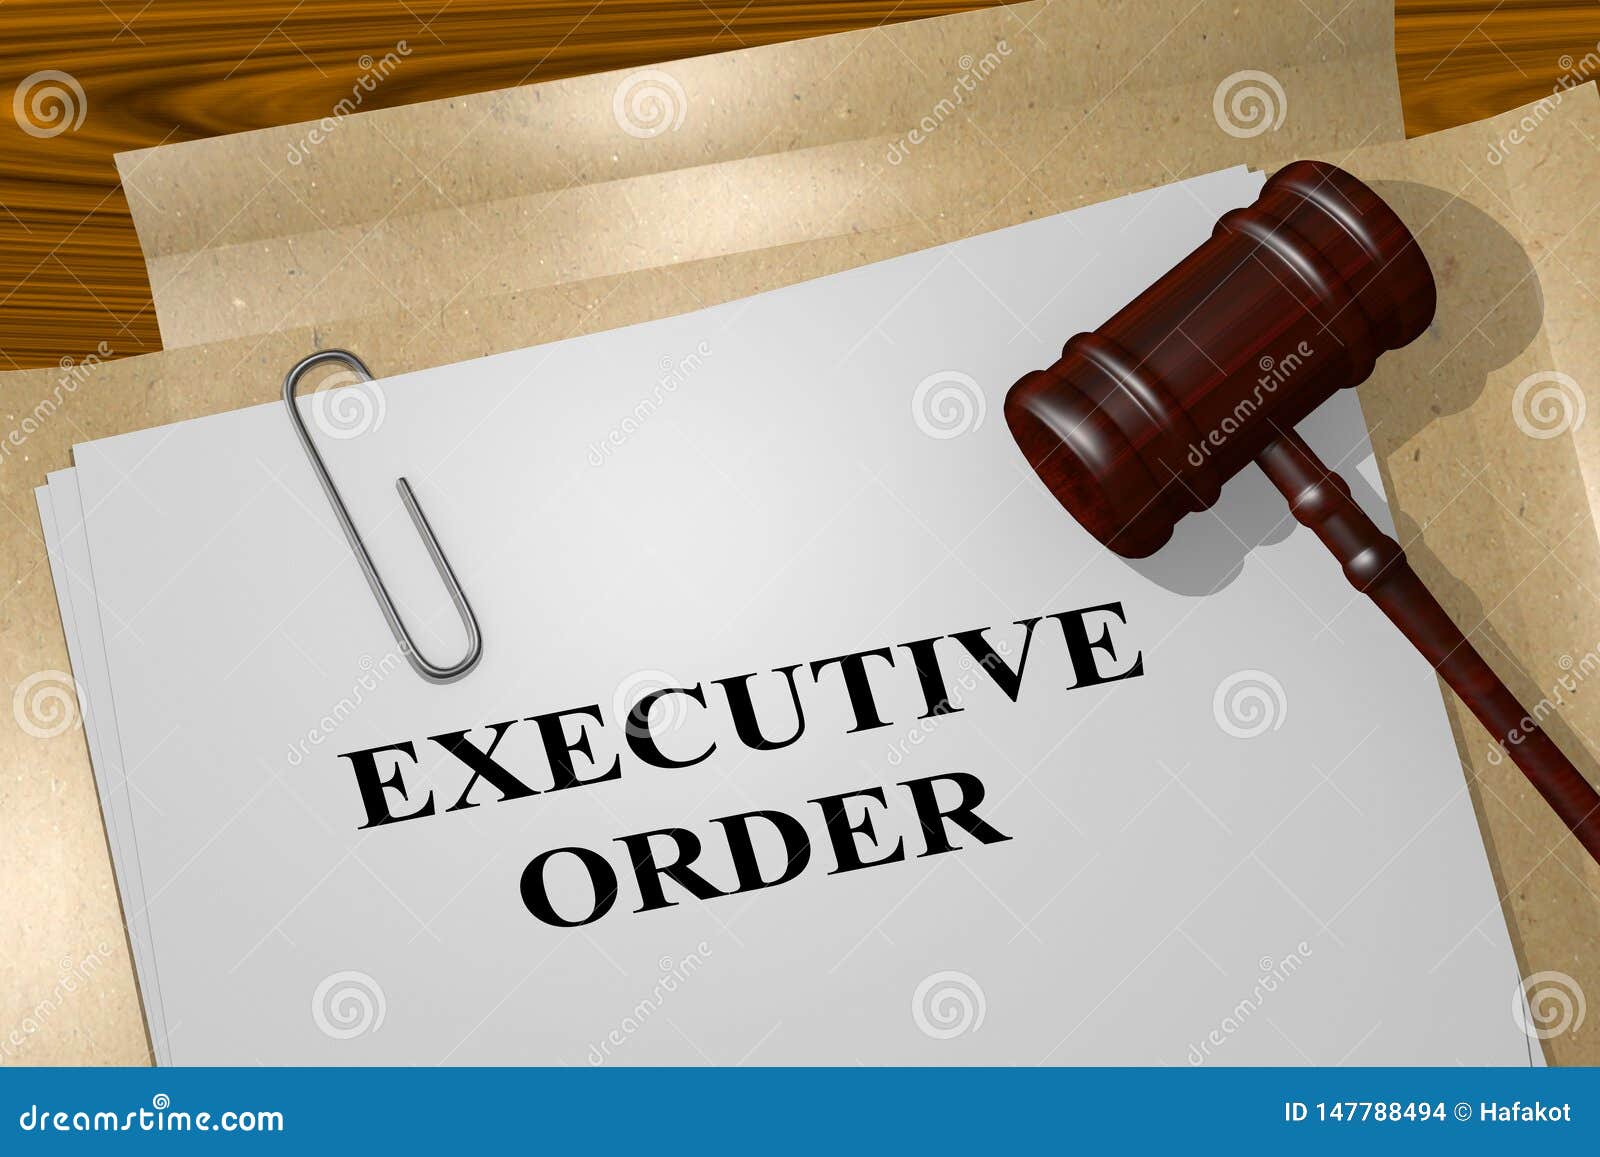 EXECUTIVE ORDER concept stock illustration. Illustration of rules